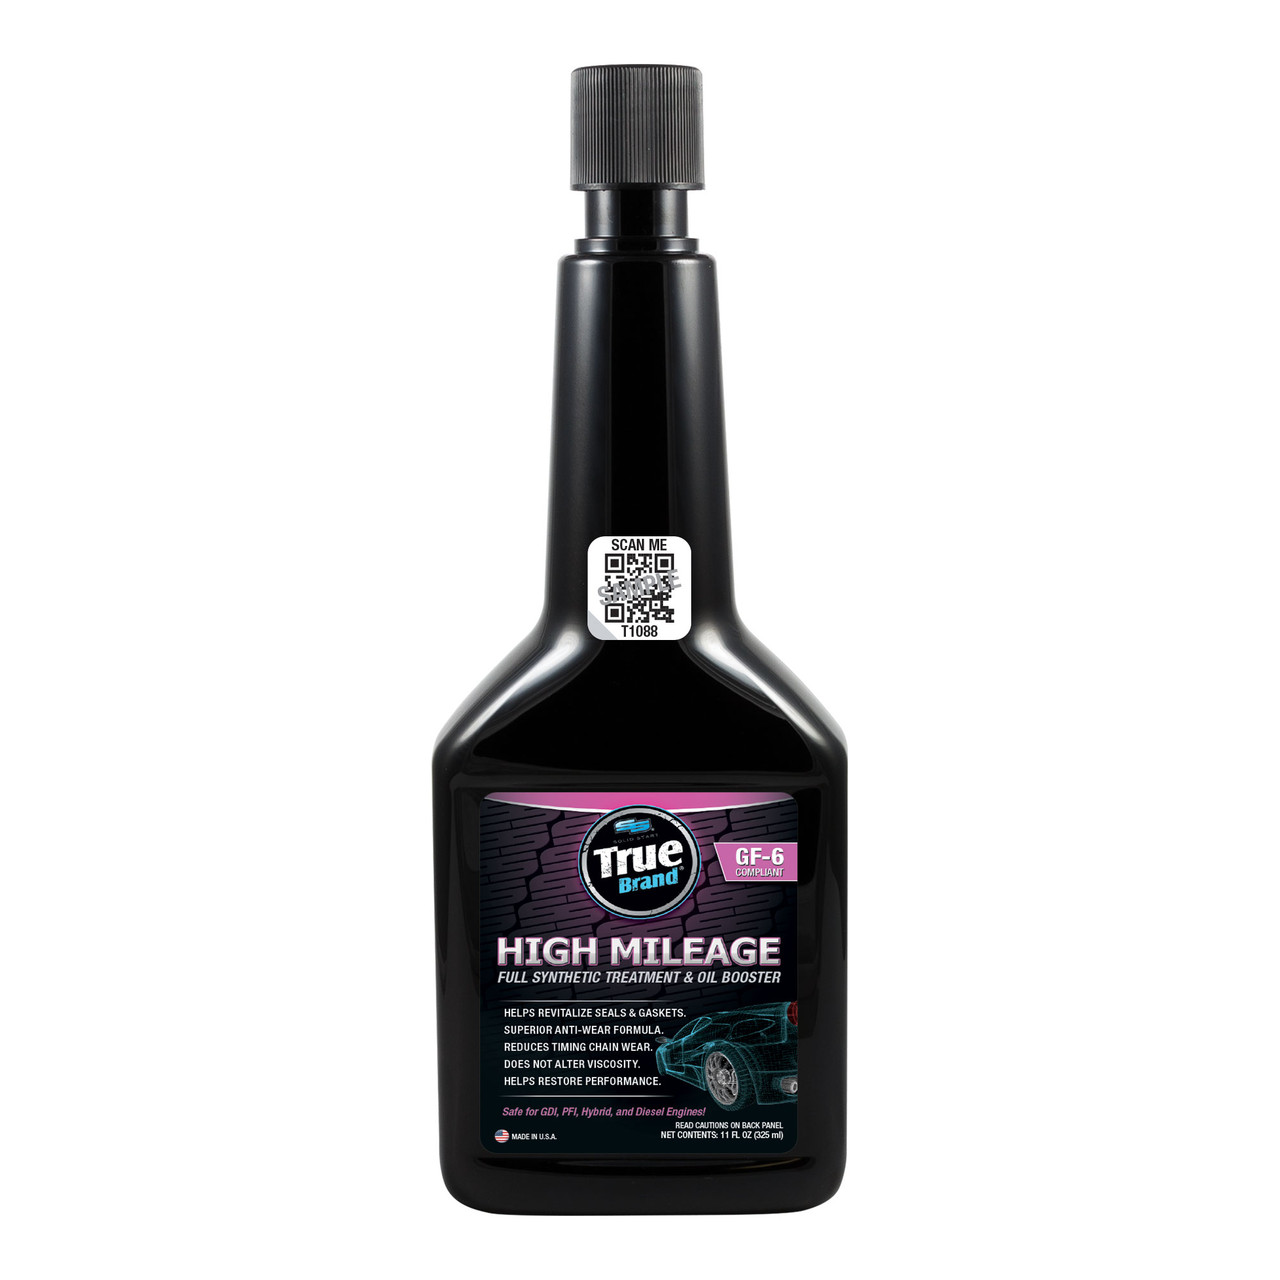 True Brand High Mileage Full Synthetic Treatment & Oil Booster - 11 oz Bottles